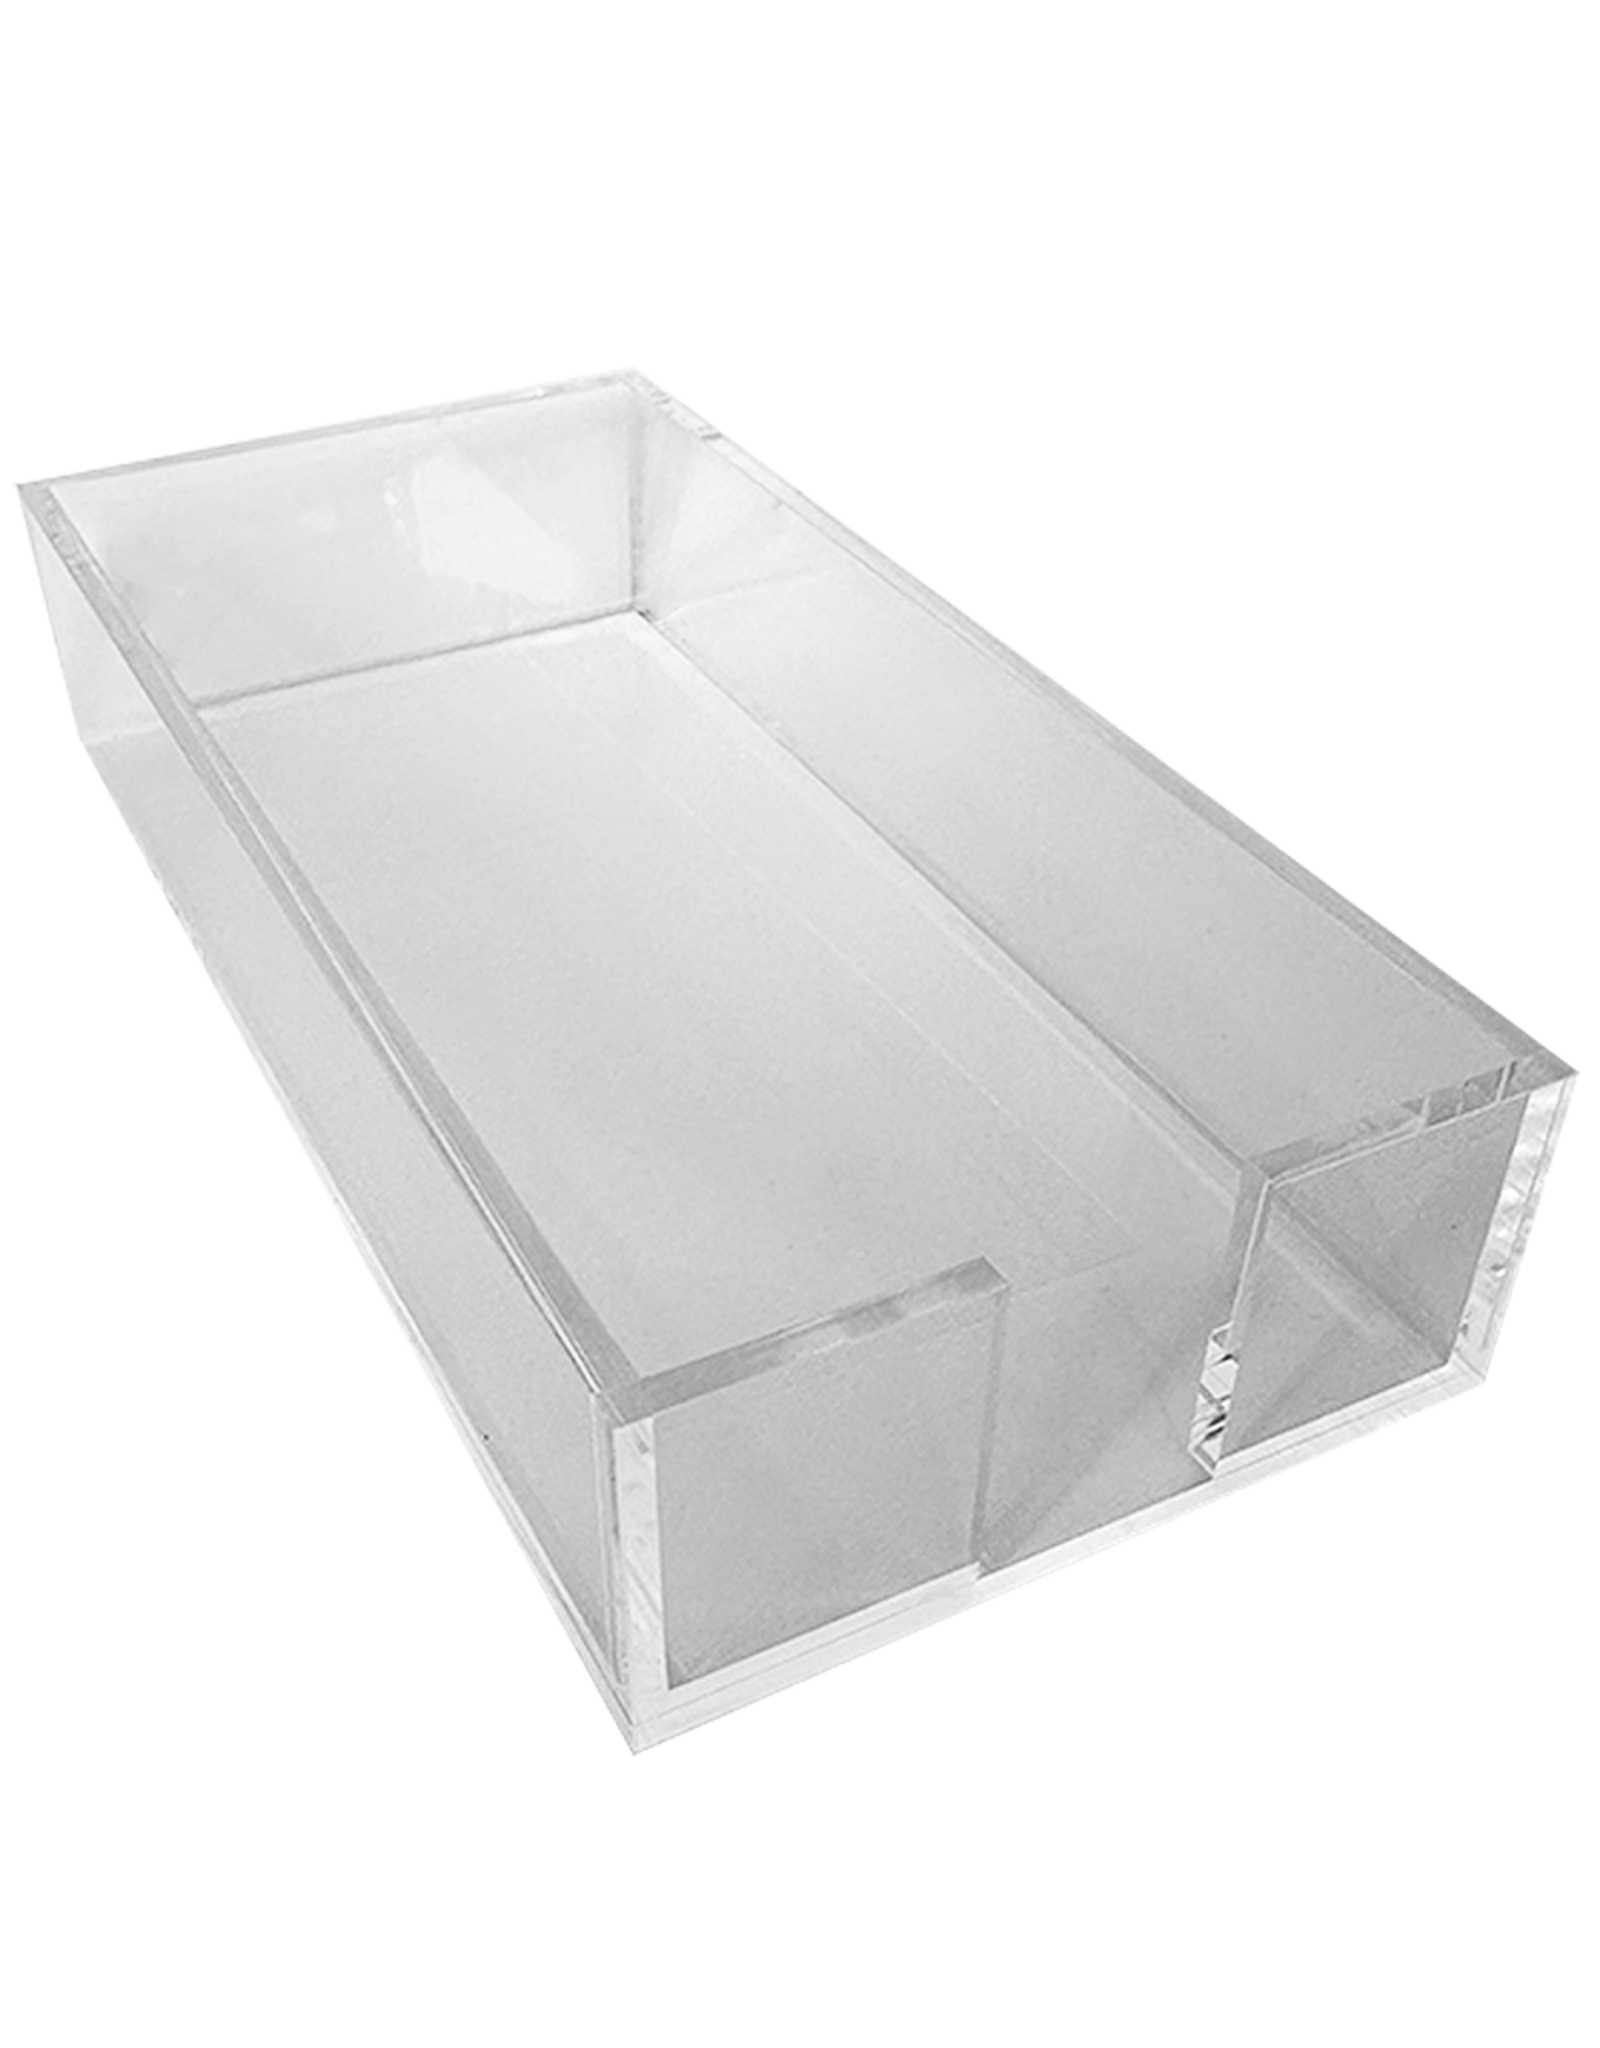 Black Ink Lucite Trays Buck Tray Holder 4x9 Buck Notepads